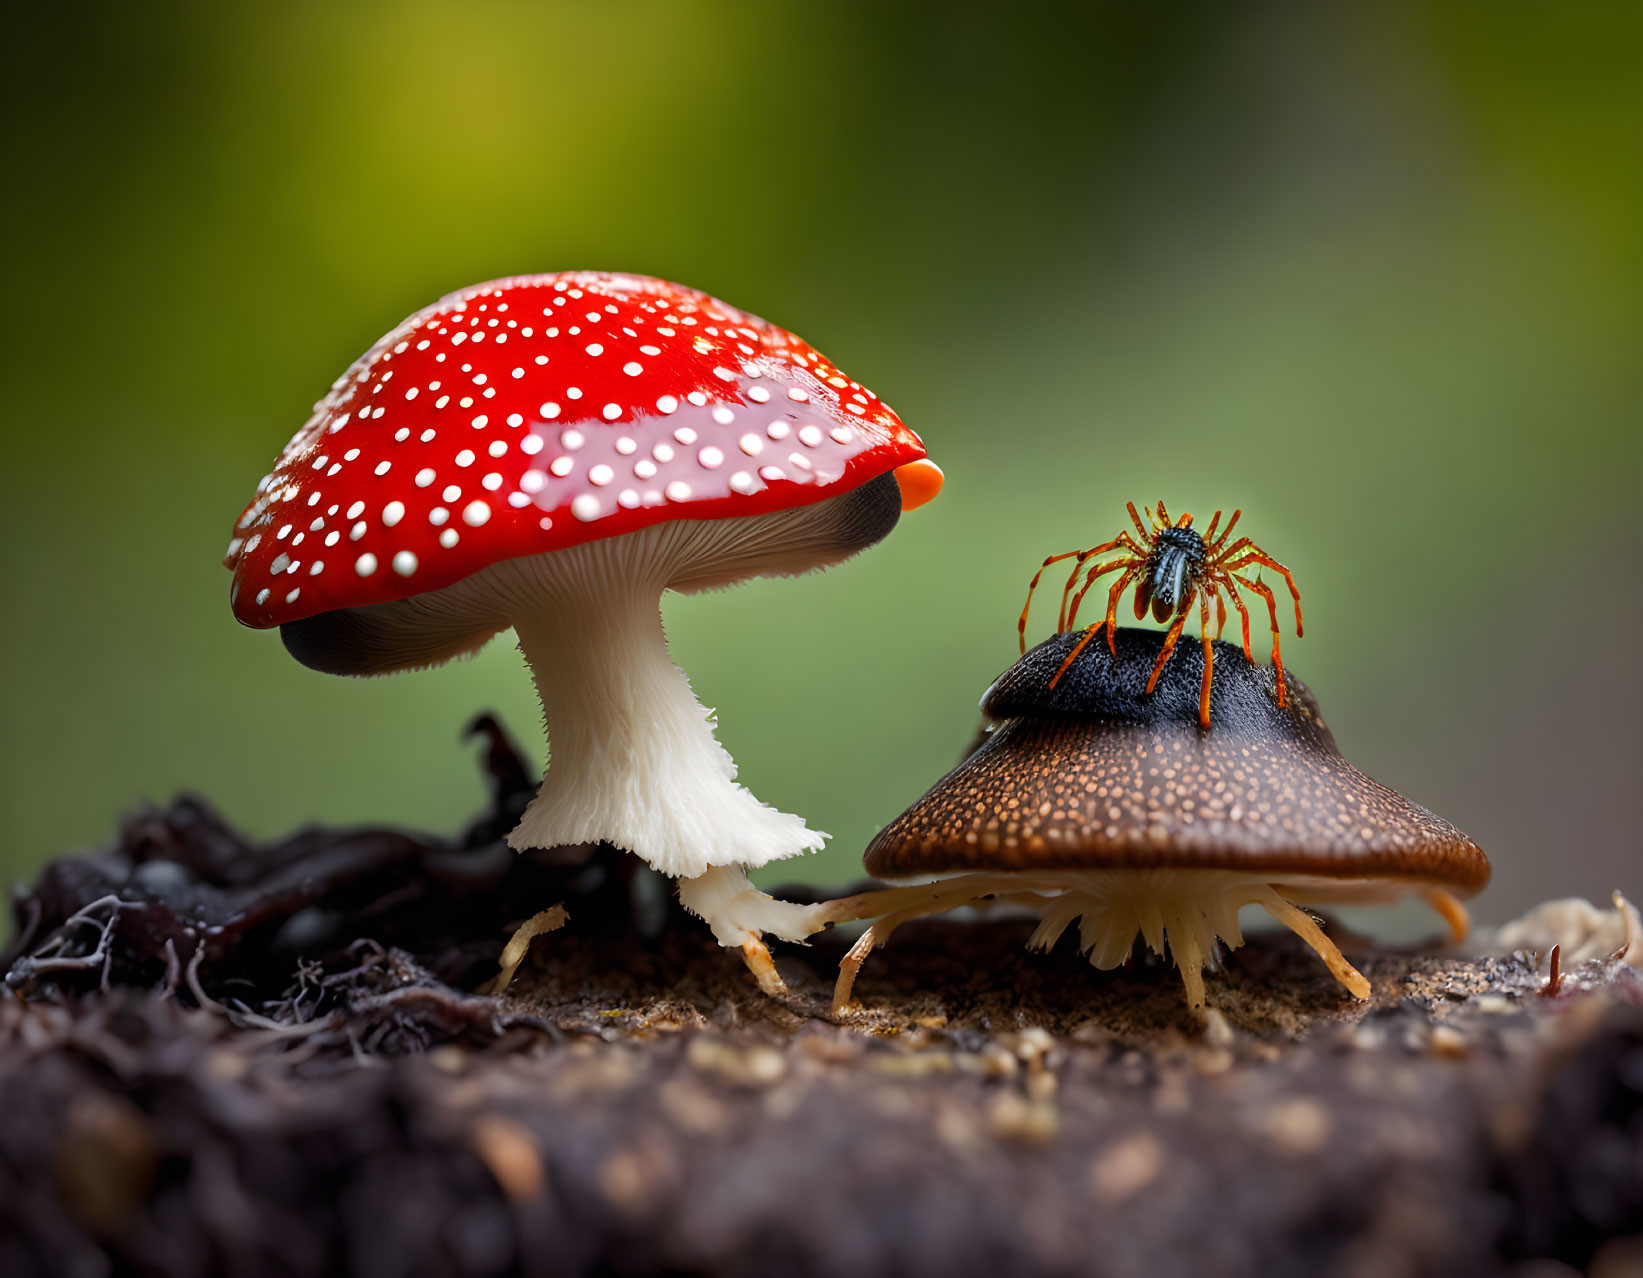 Vibrant red mushroom with white spots beside brown mushroom and spider on blurred green background